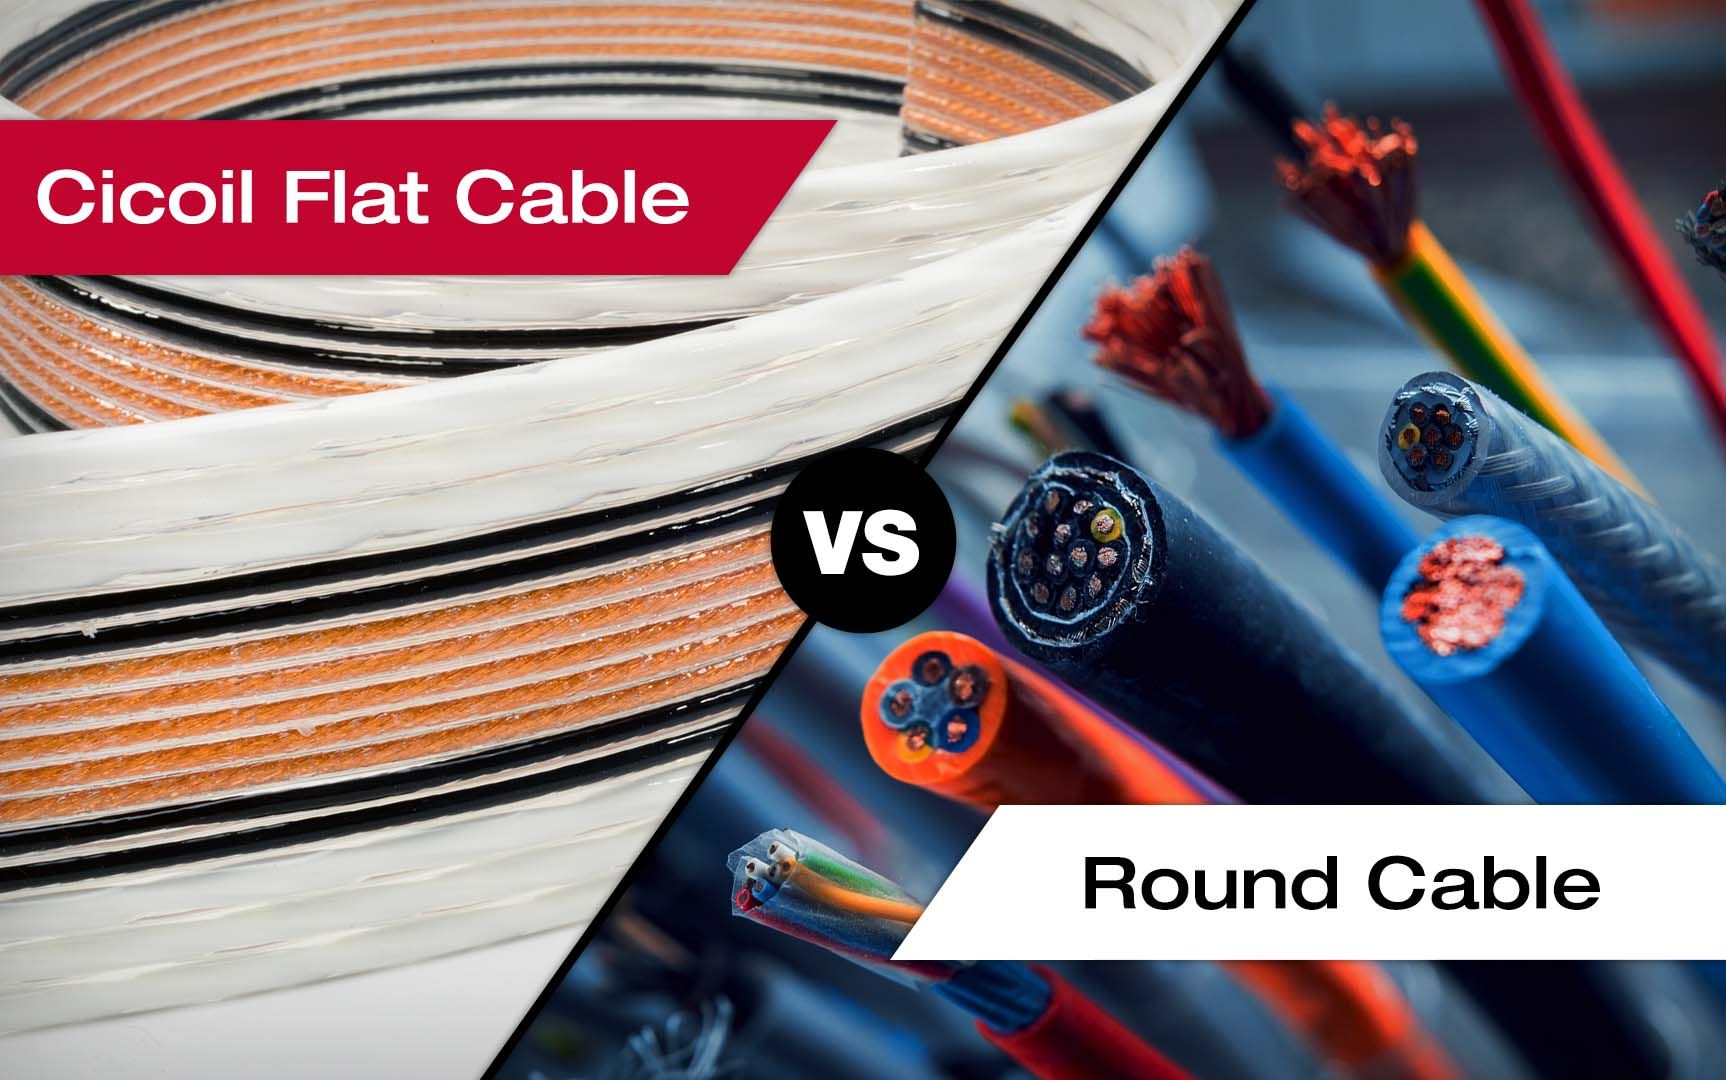 Cicoil Flat Cable vs Round Cable